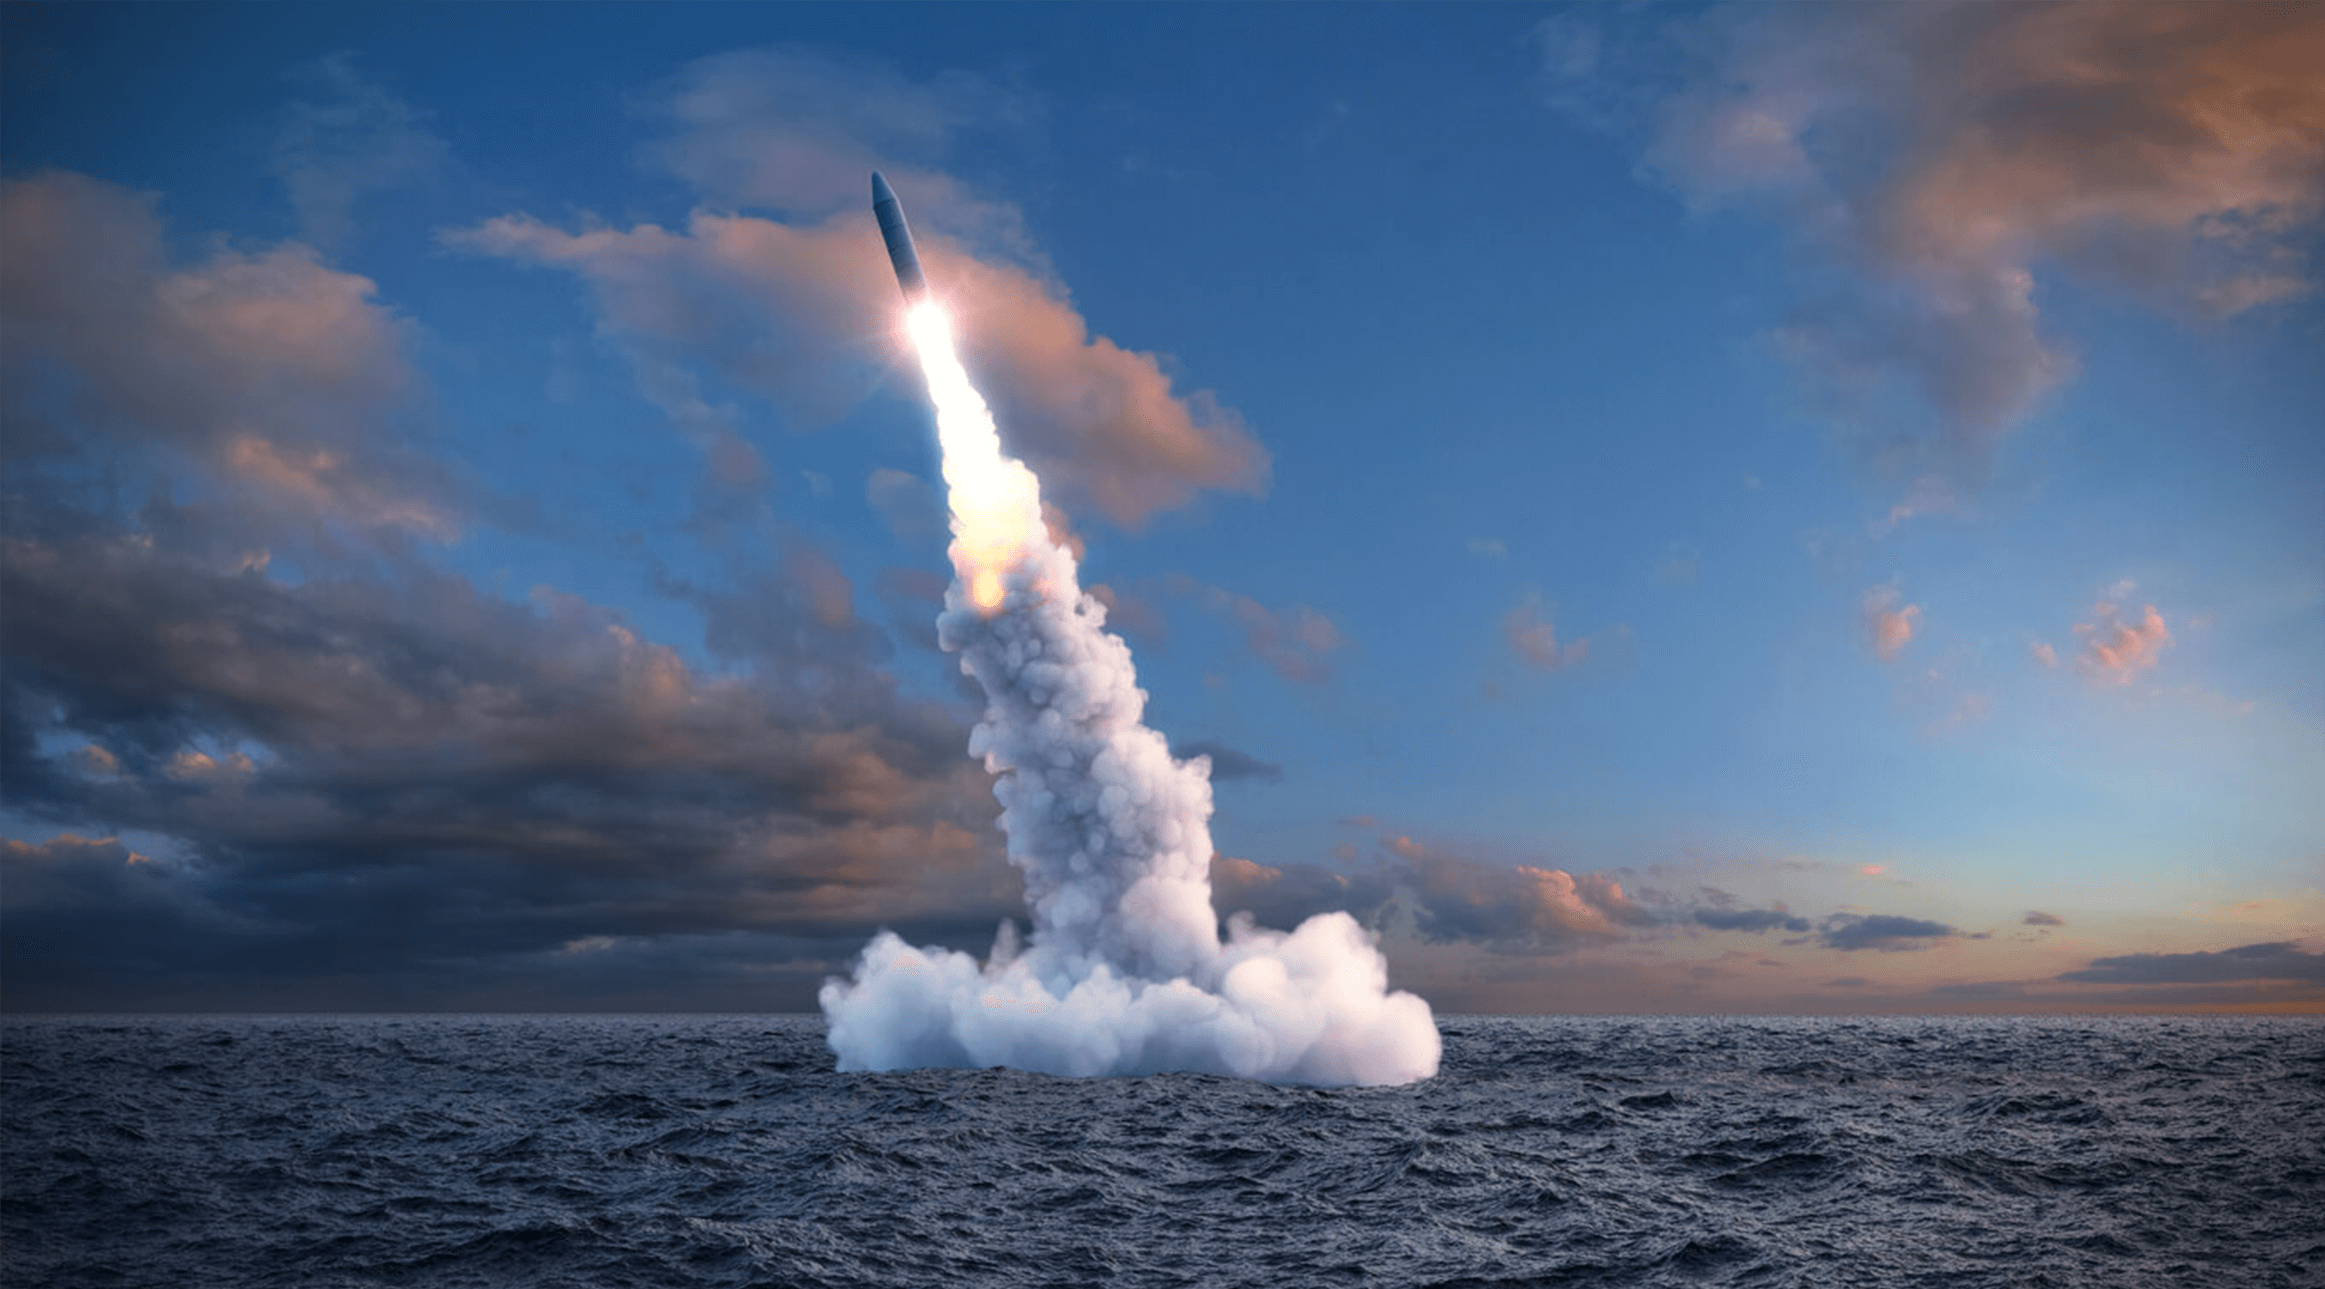 A missile is being fired from the ocean.